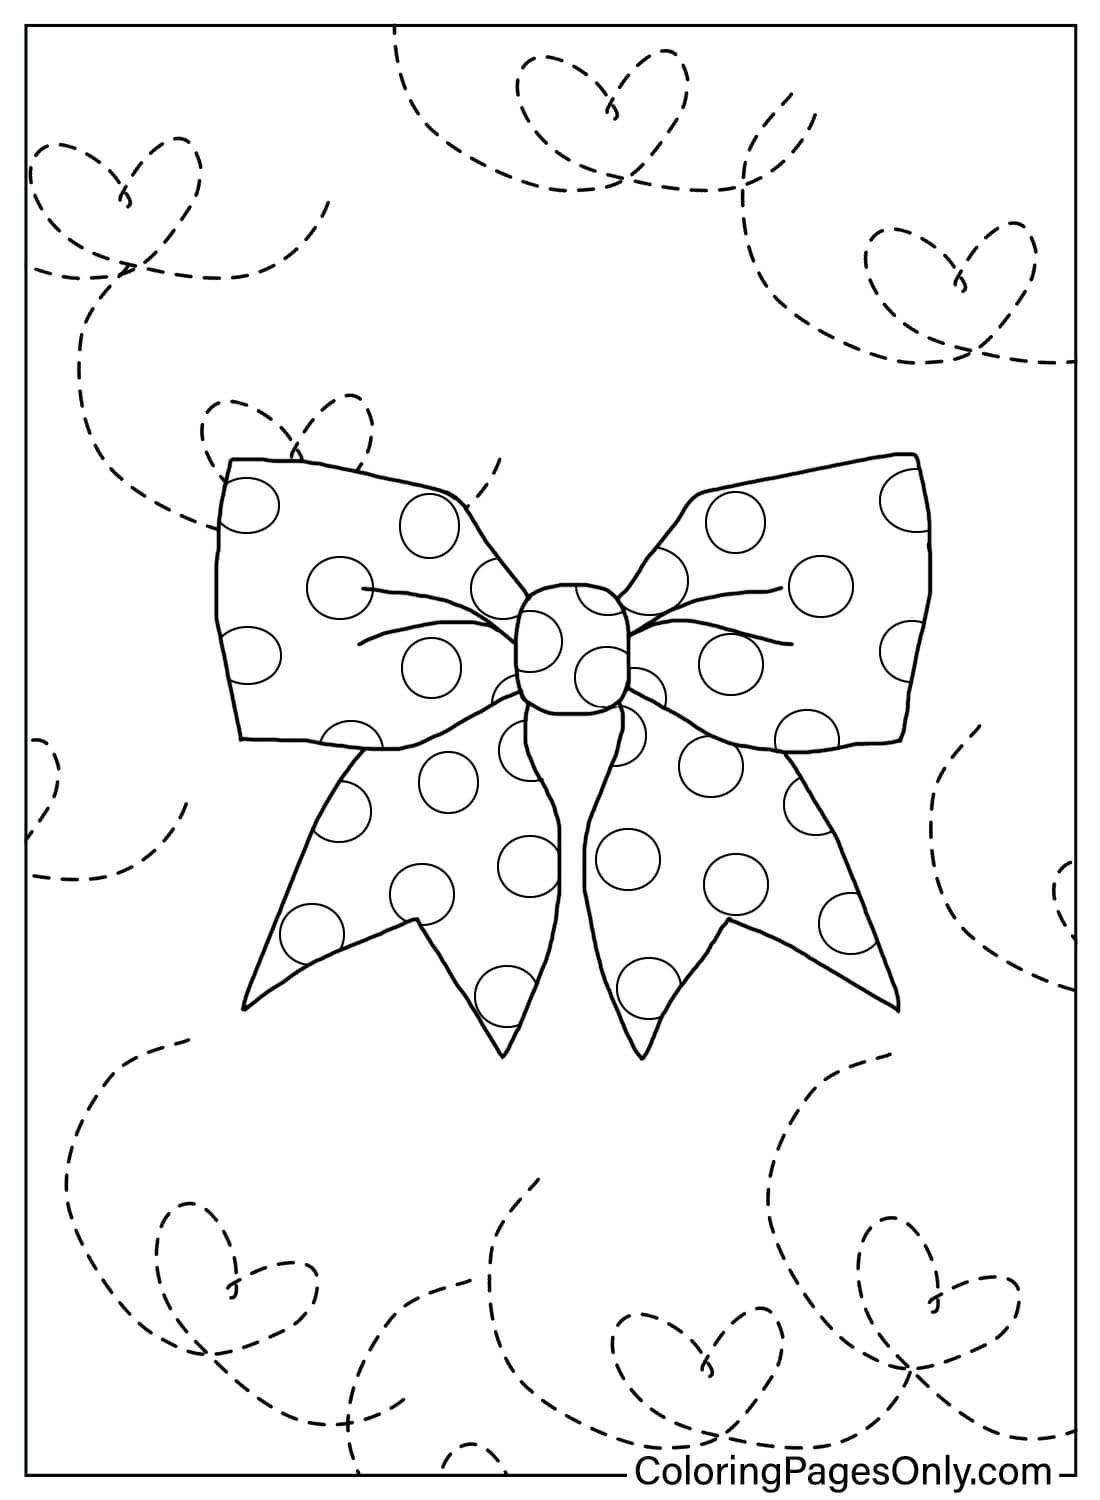 Printable Coloring Pages Bow from Bow